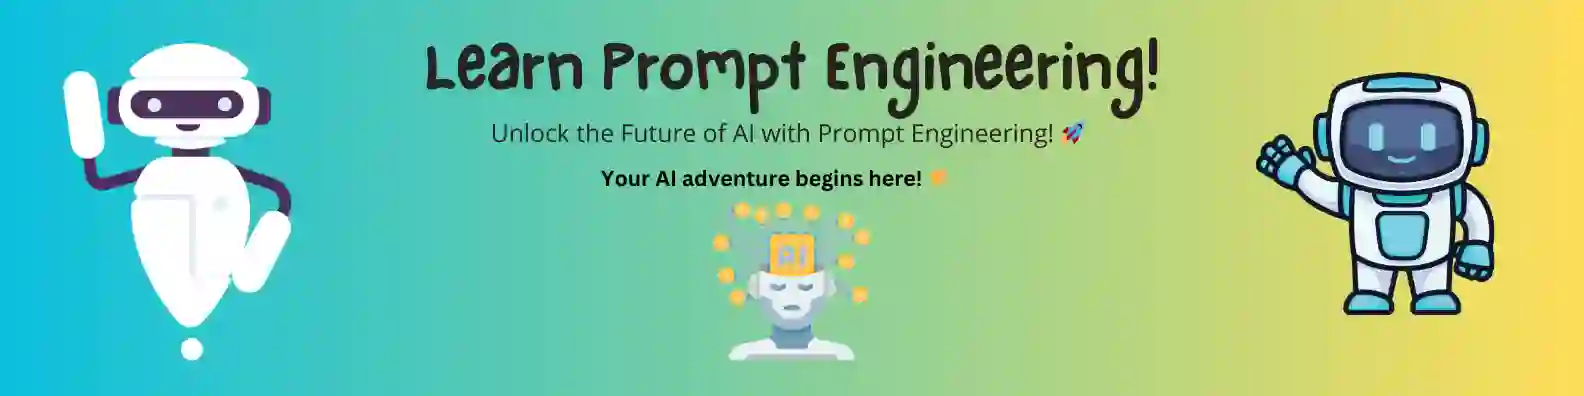 Prompt_engineering_course